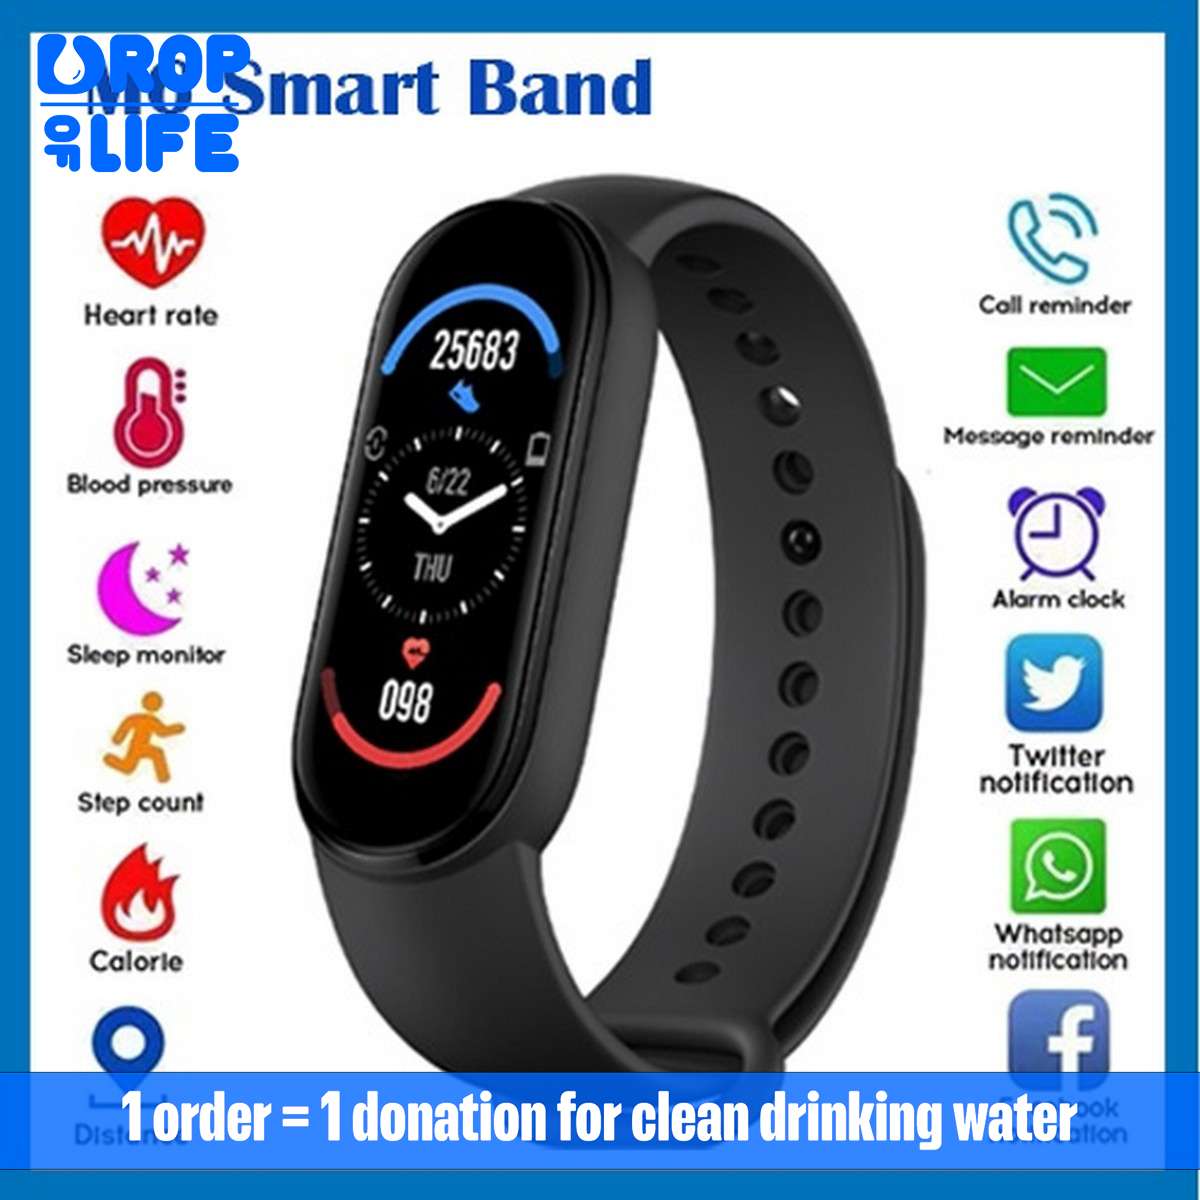 Buy M5 & M6 Smart Watches In Cheap Price Available - Amazon Pakistan